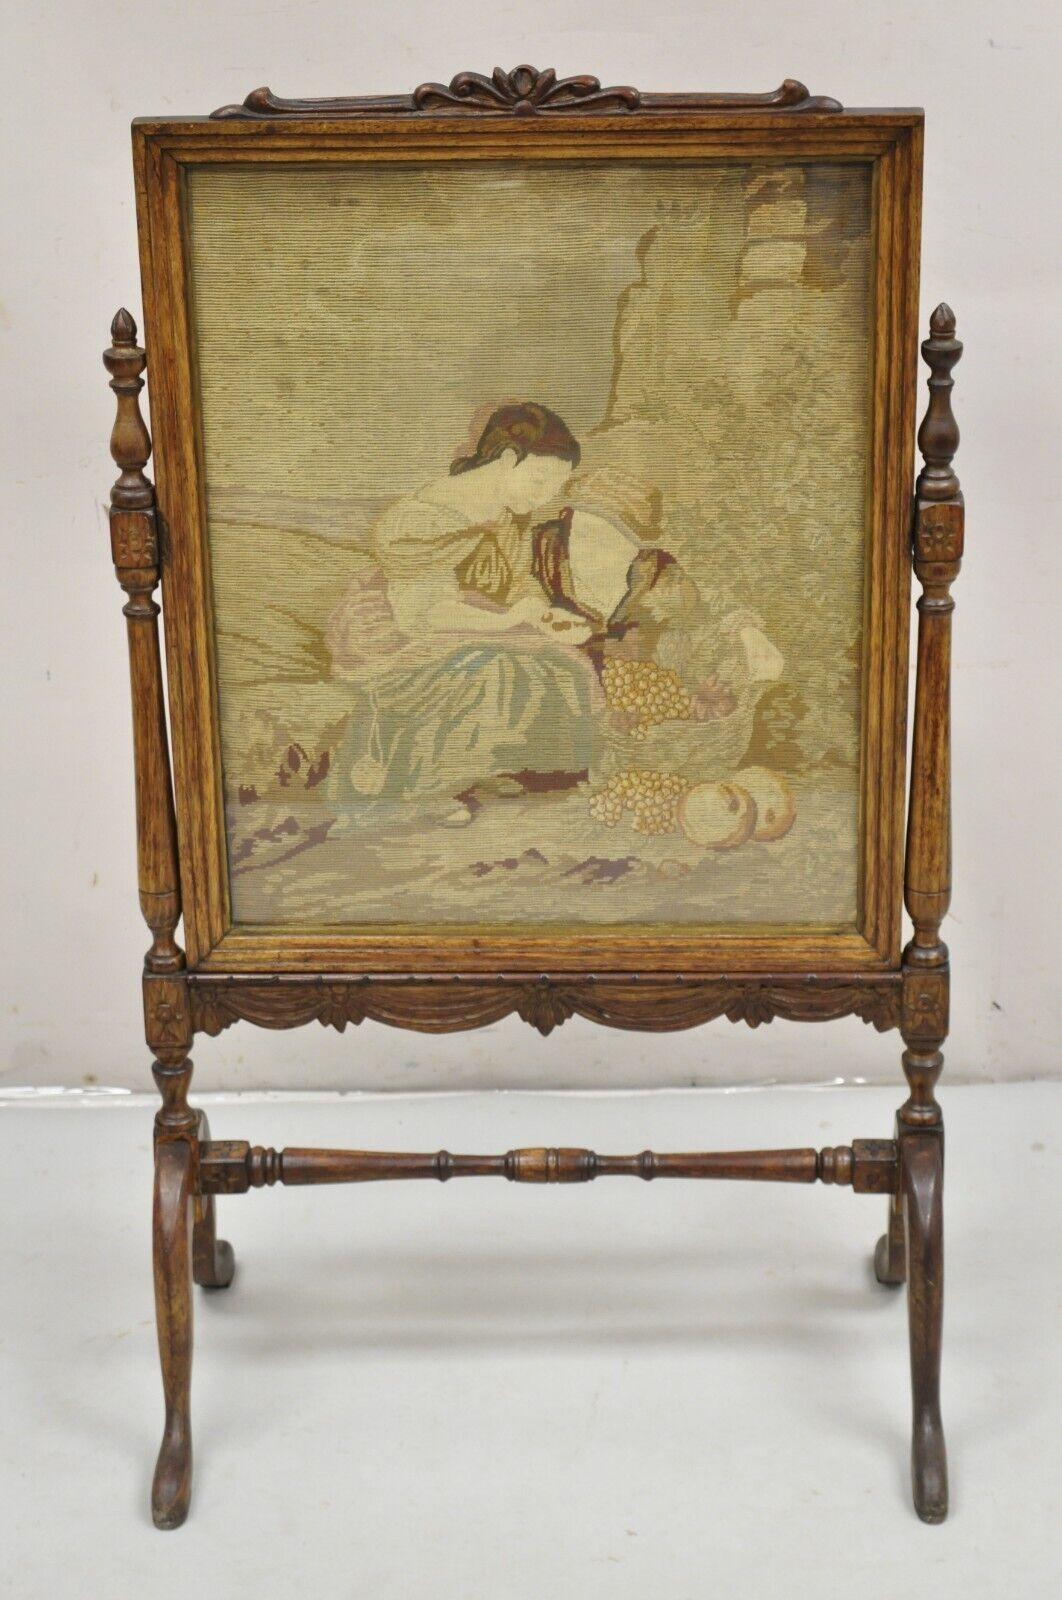 Antique French Victorian Carved Walnut and Needlepoint Fireplace Screen. Circa 19th Century. Measurements: 39